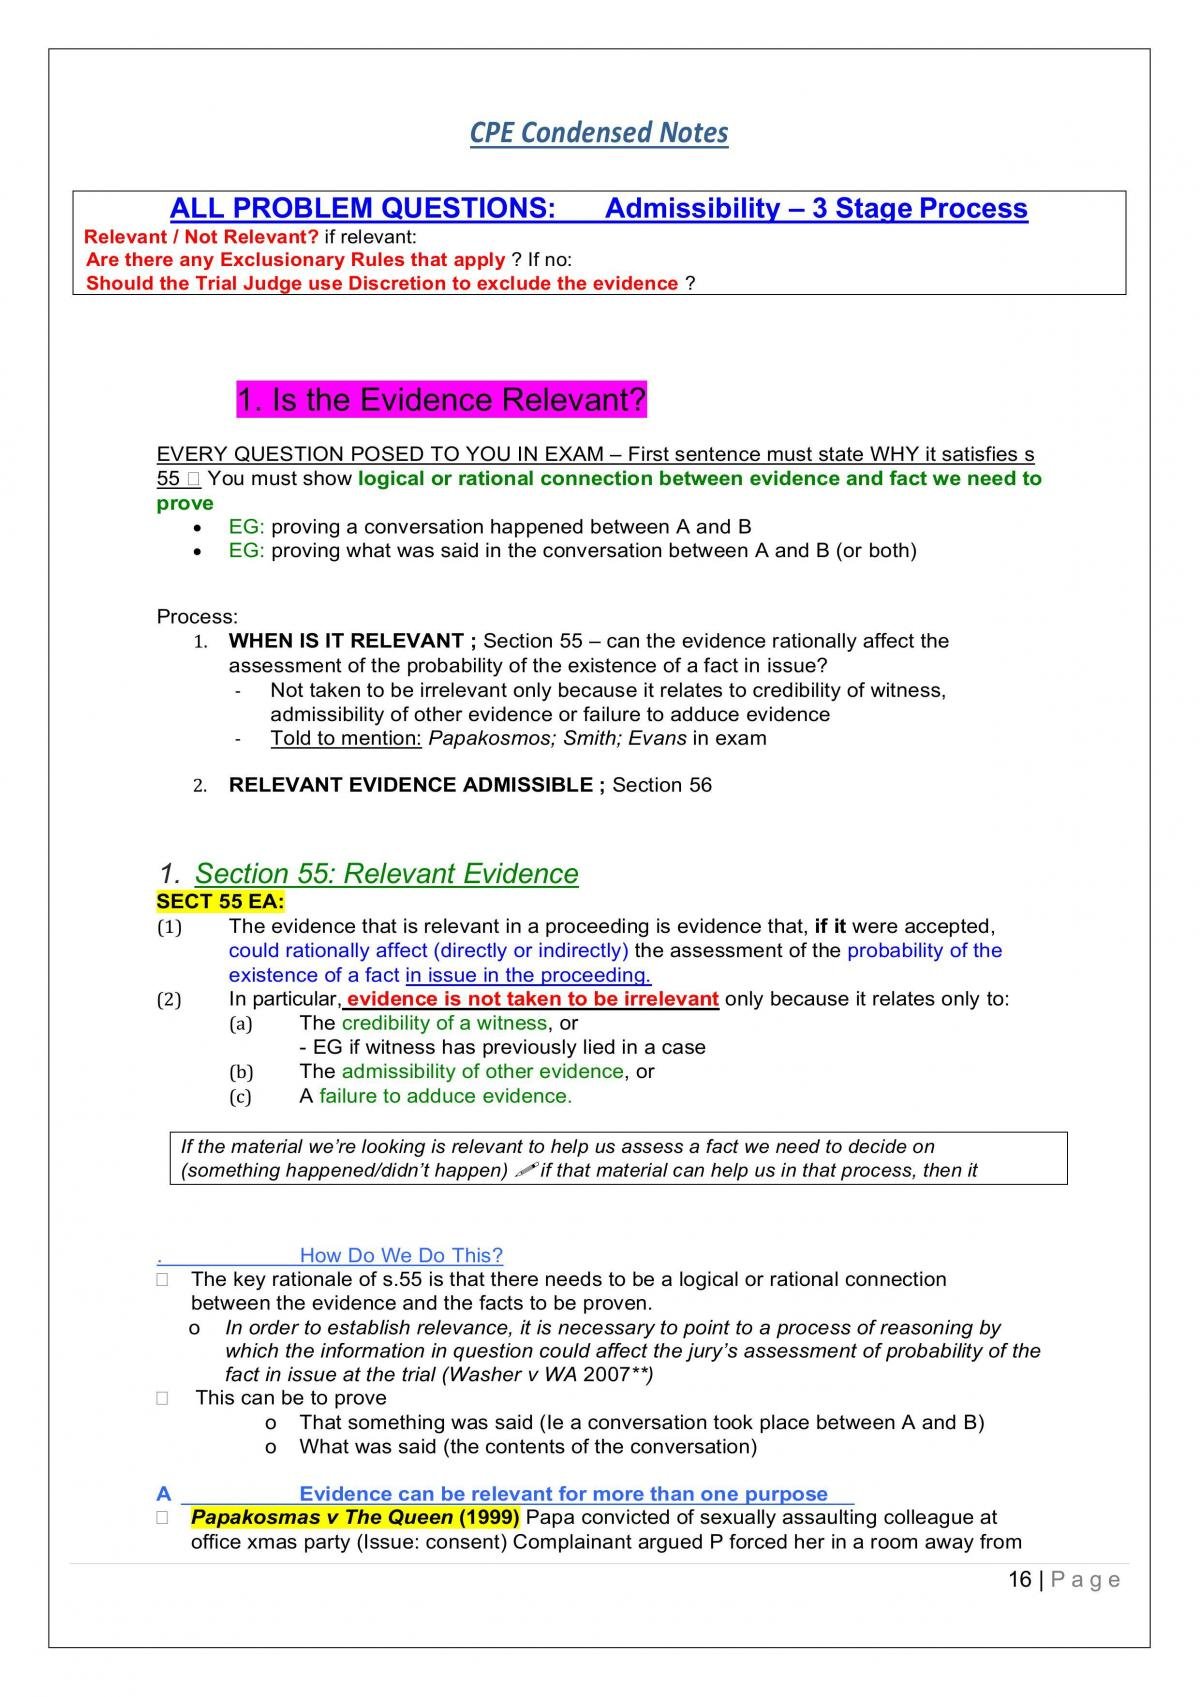 CPE Final Exam Notes - Summarised Templates and Notes  - Page 16